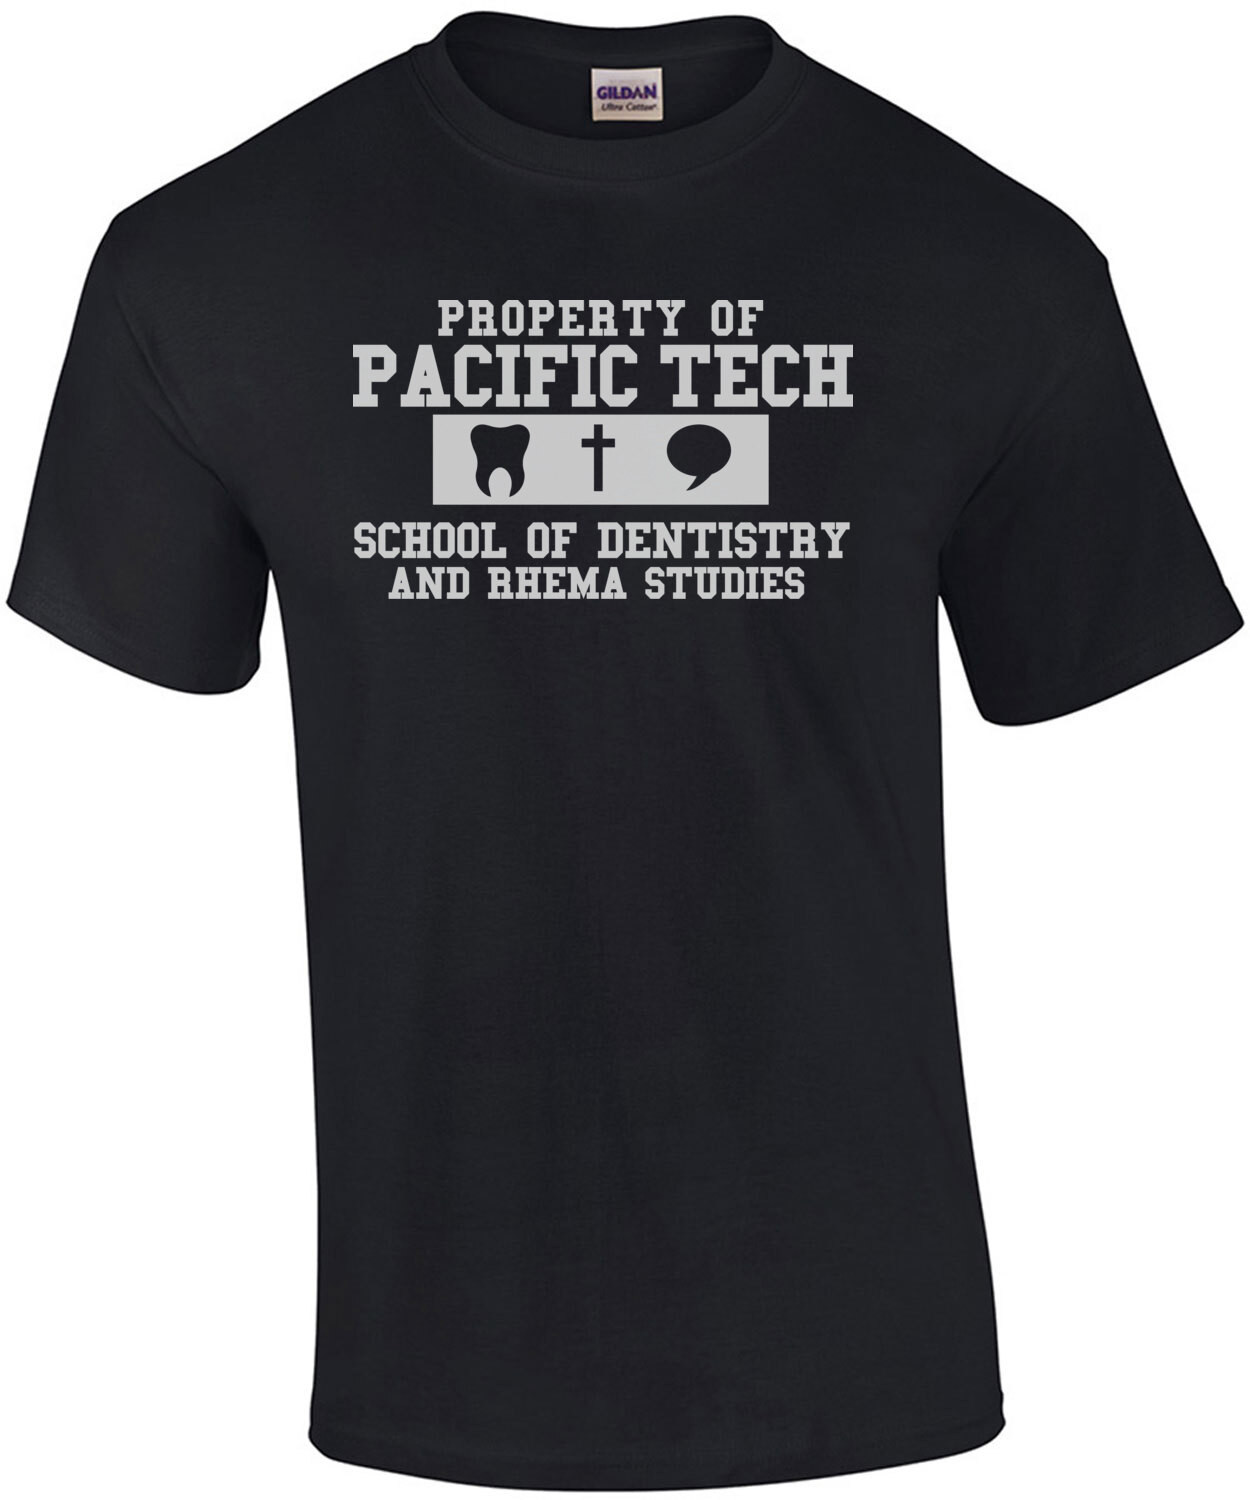 Property of Pacific Tech - School of Dentistry and Rhema Studies - Real Genius - 80's T-Shirt